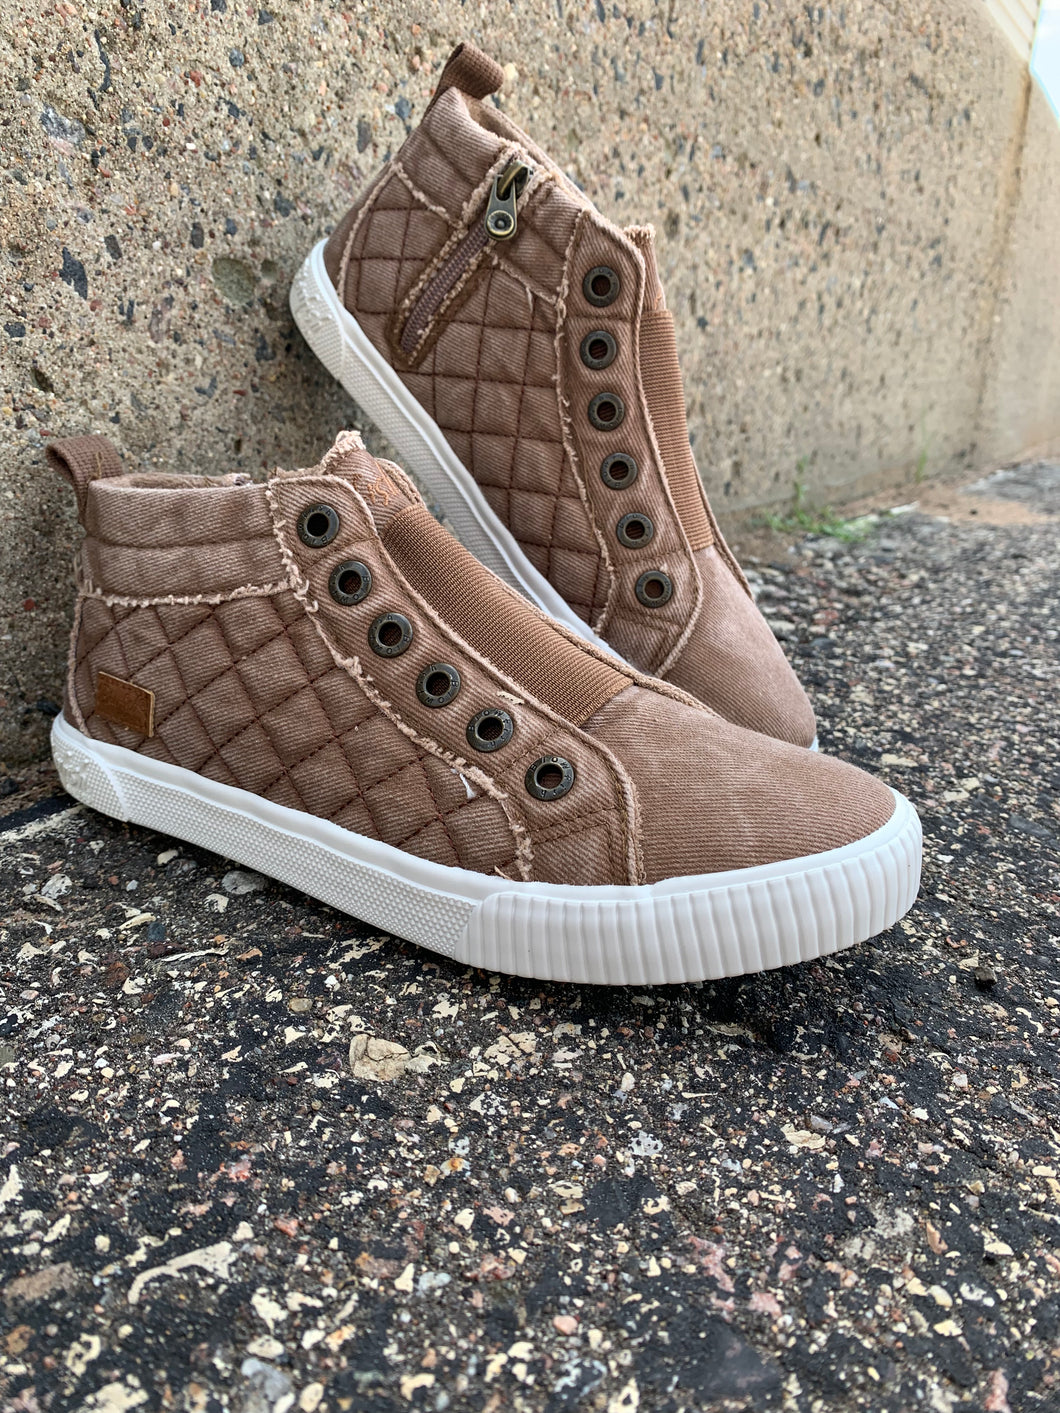 blowfish brown twill quilted sneaker